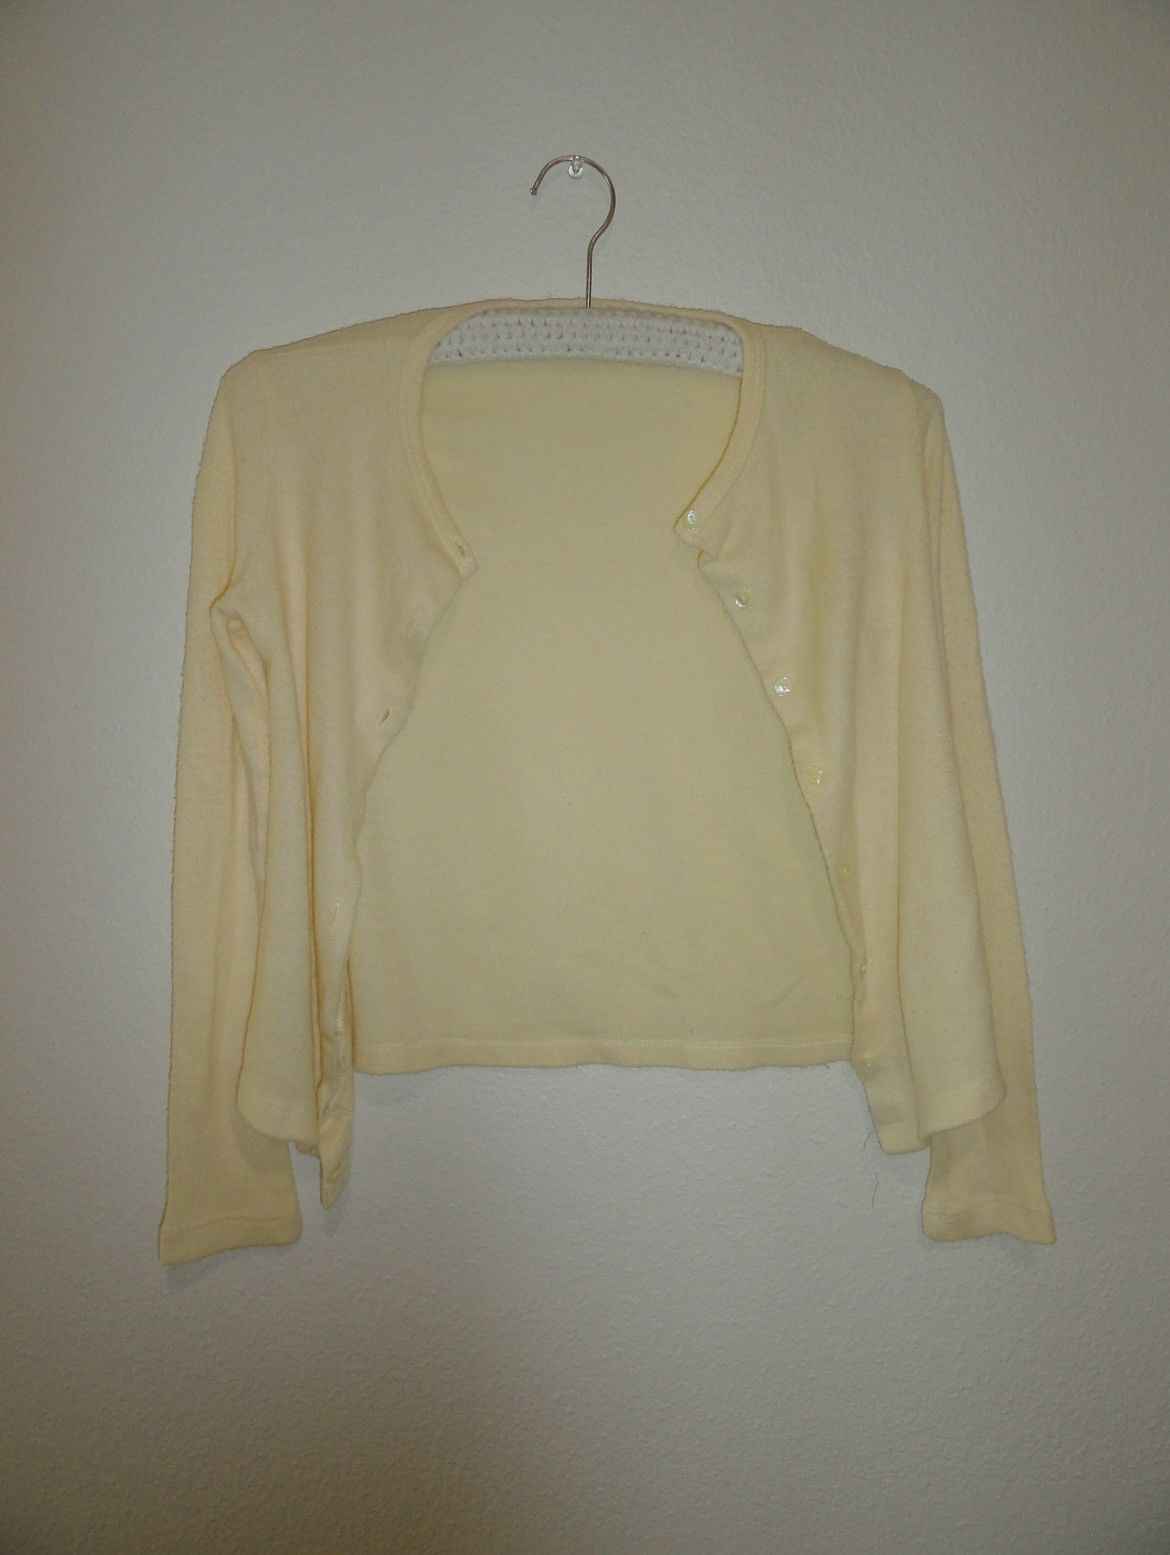 Vintage Vintage Yellow Cardigan Size XS / US 0-2 / IT 36-38 - 1 Preview